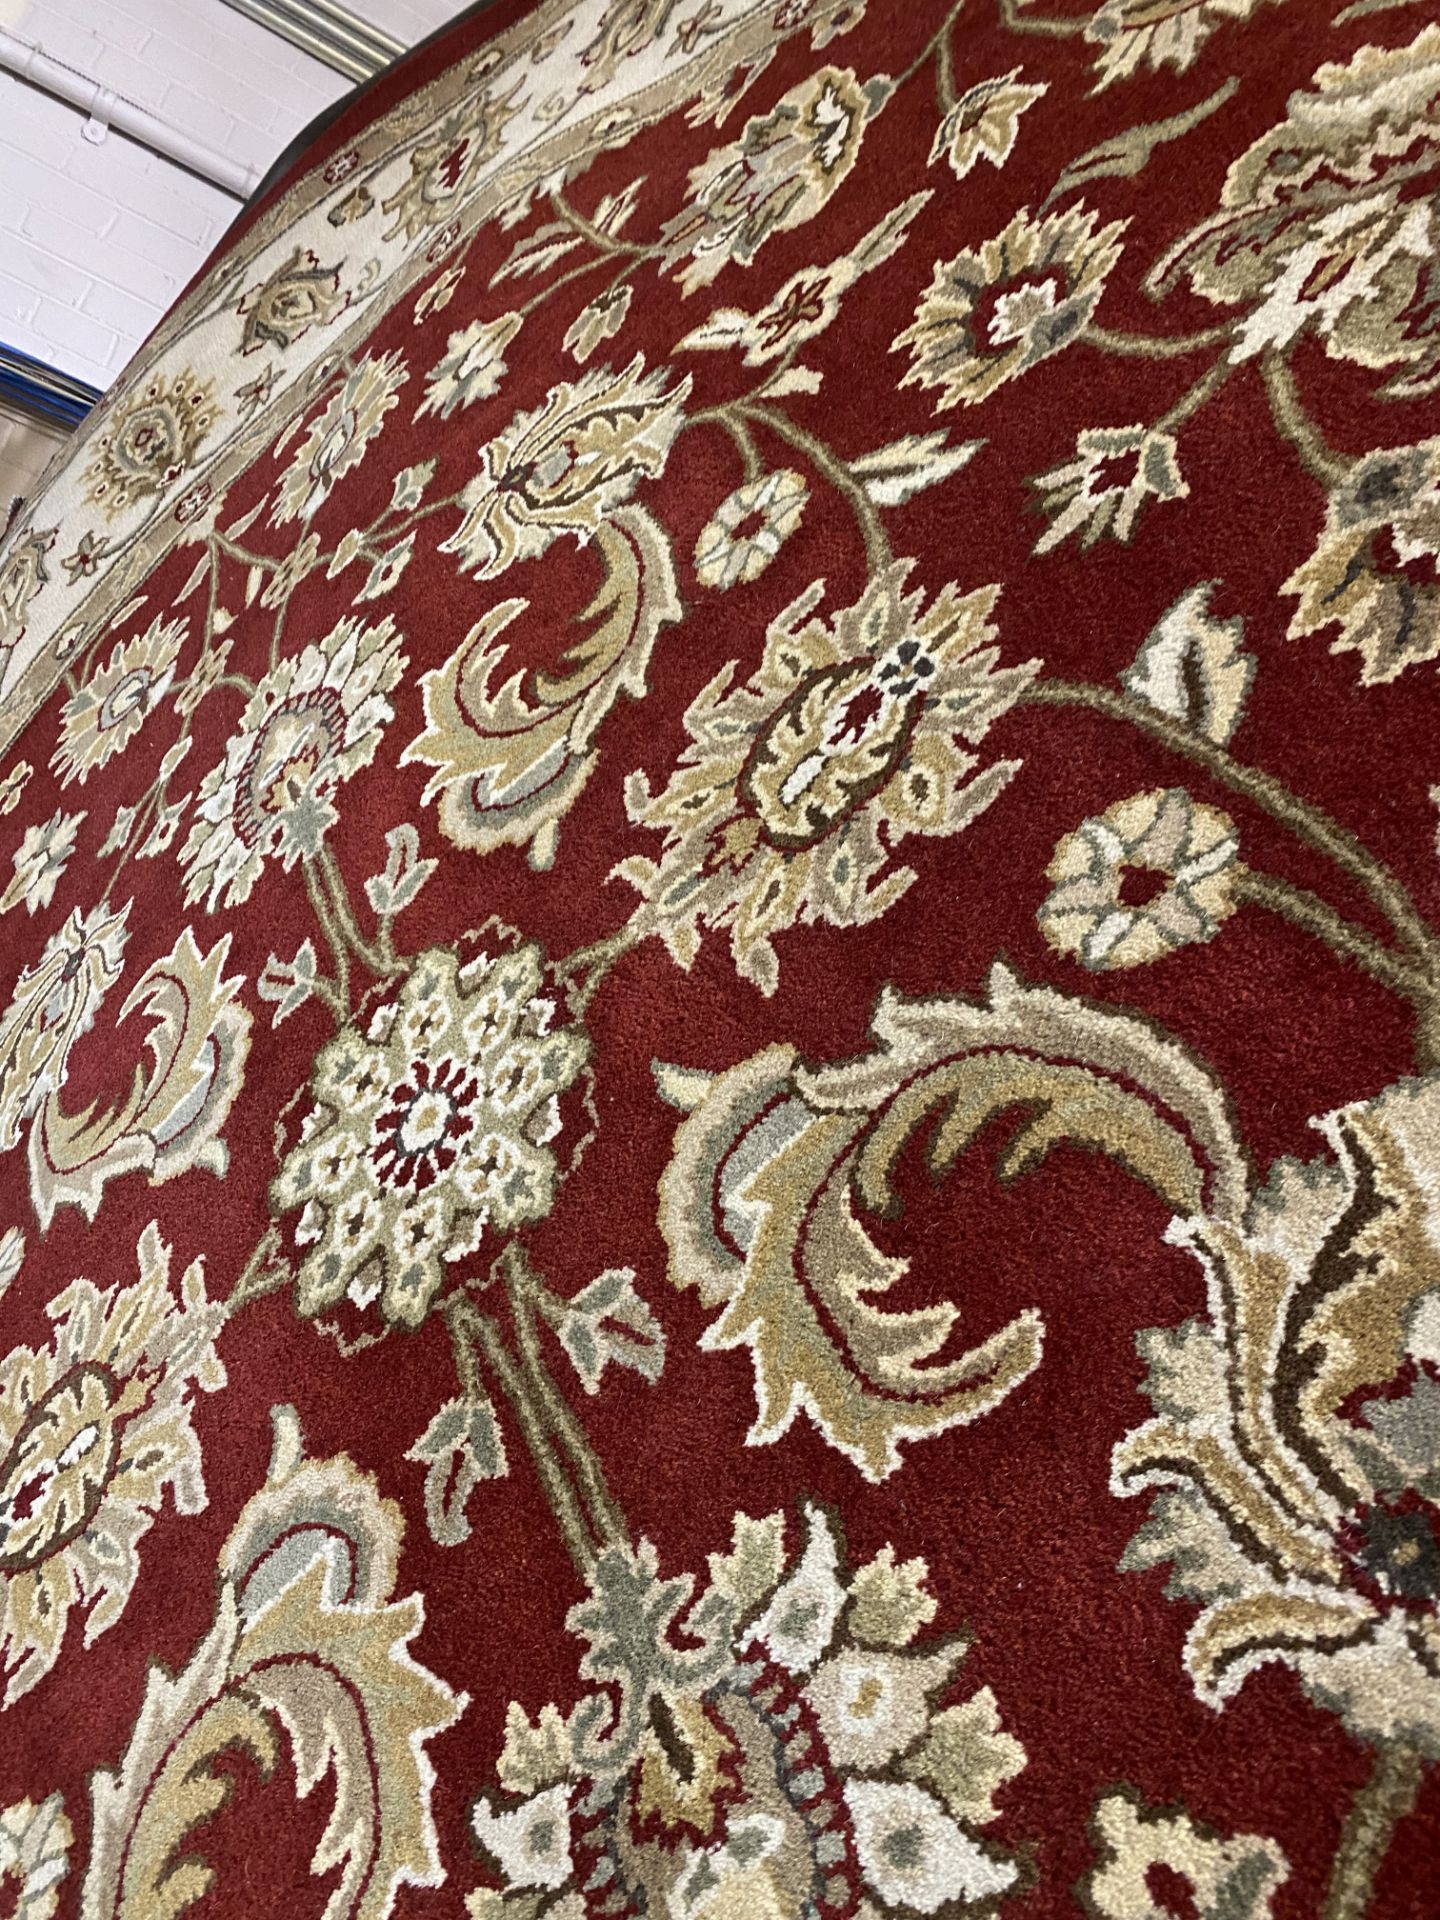 8' ROUND WOOL HAND MADE IN INDIA, MSRP $1,998, INVENTORY CODE LE MANS IAC82128 RD/IV - Image 4 of 6